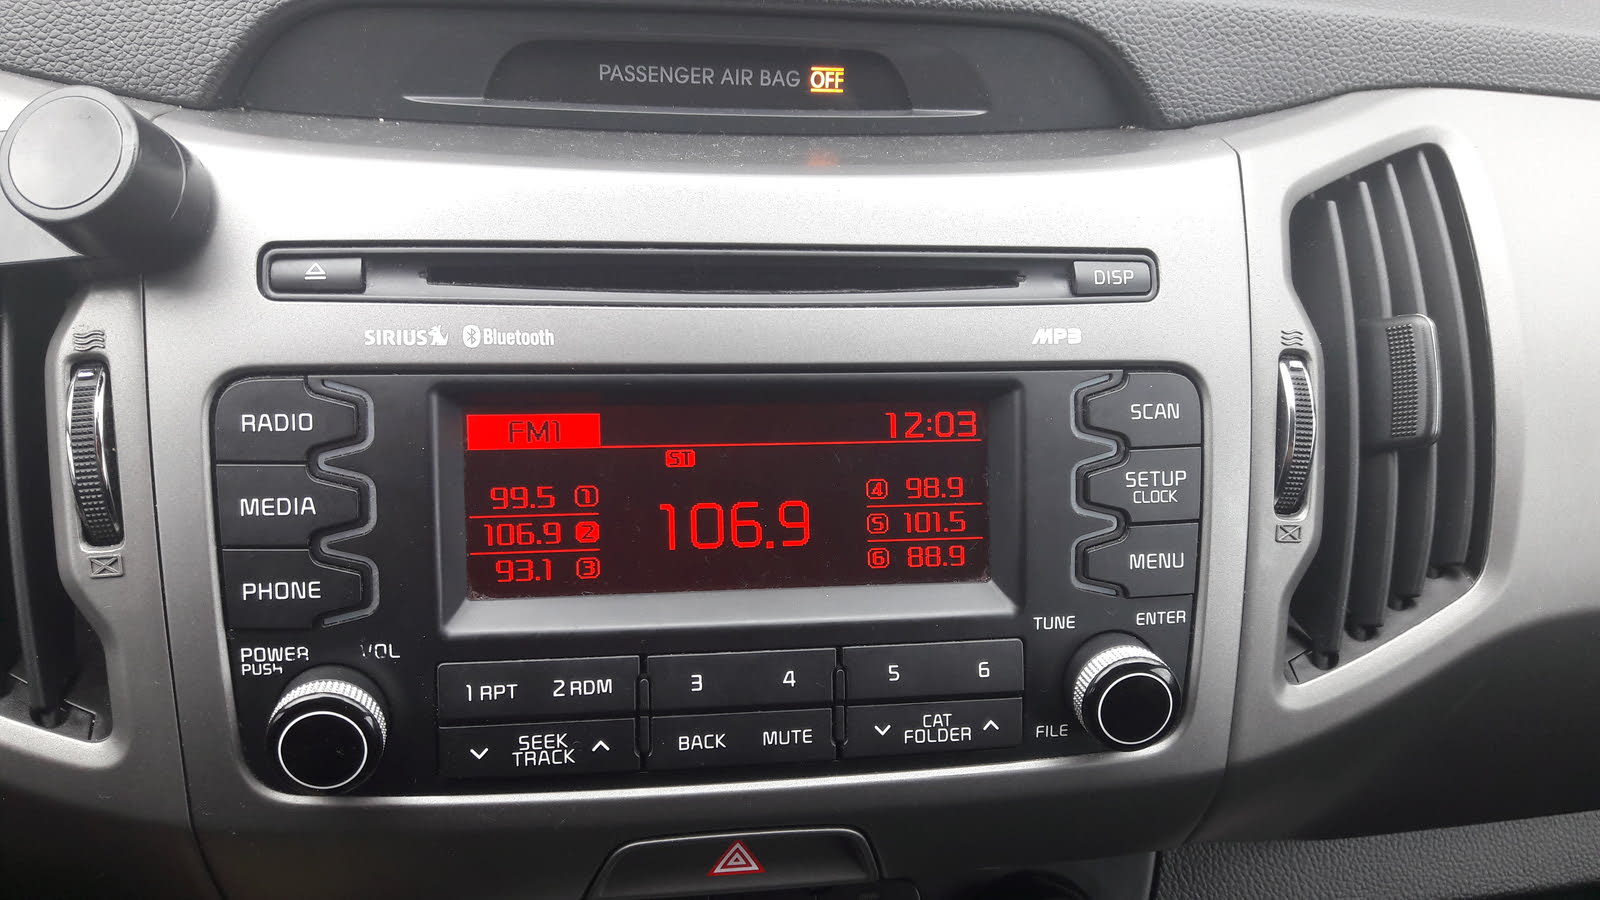 Kia Sportage Questions - What to do if there is no sound coming out of the  speakers of my car - CarGurus